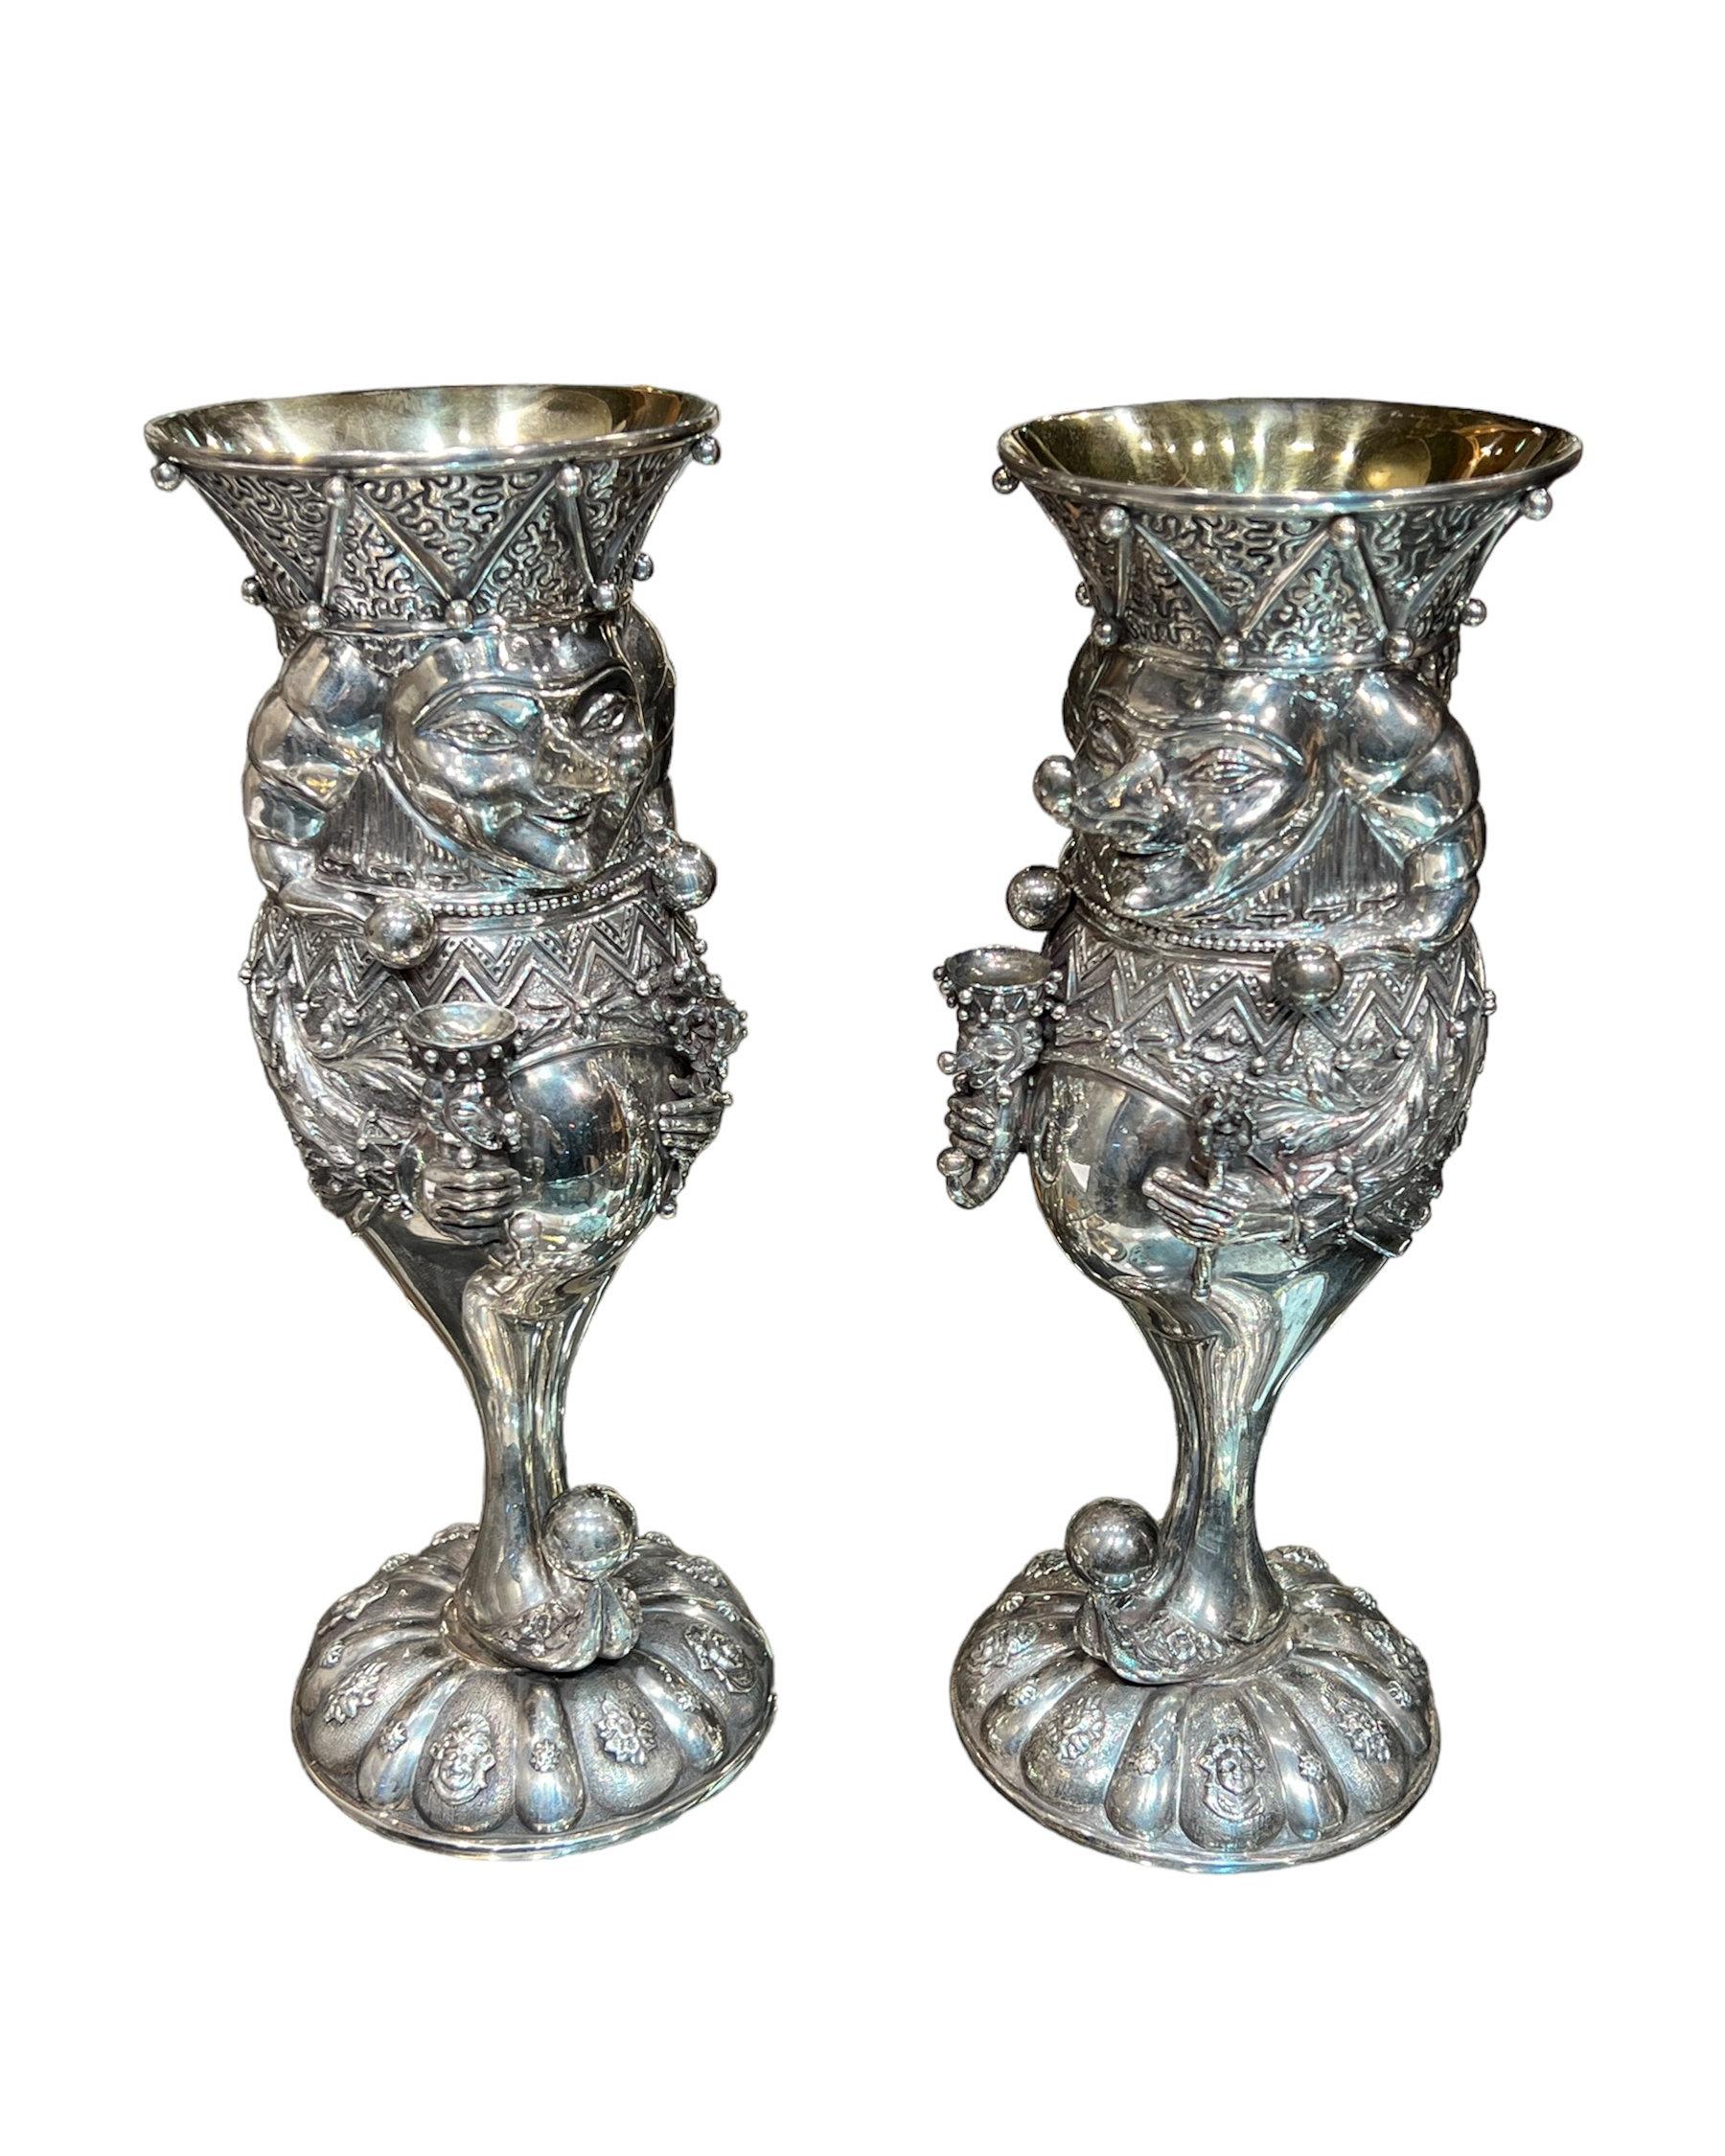 Pair Large Sterling Silver Petrushka Harlequin Wine Goblets by Mihail Chemiakin  In Good Condition For Sale In New York, US